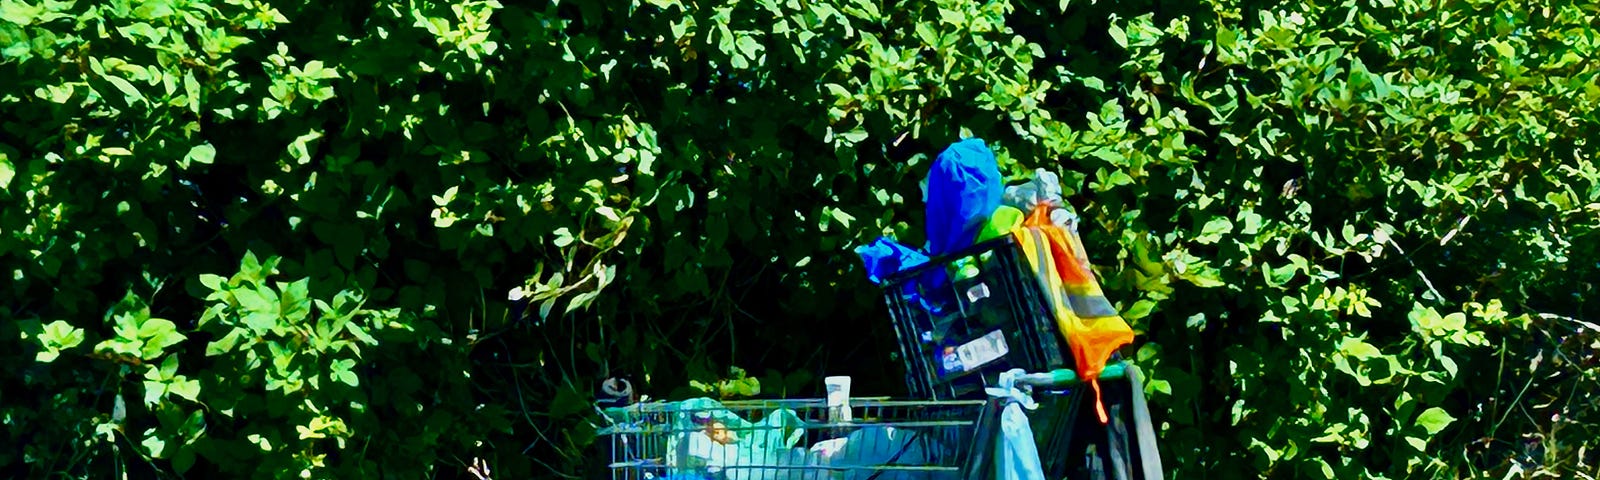 A loaded grocery cart sits beside the road. The contents are a variety of clothing and a bin. It appears to be the possession of someone who might be homeless